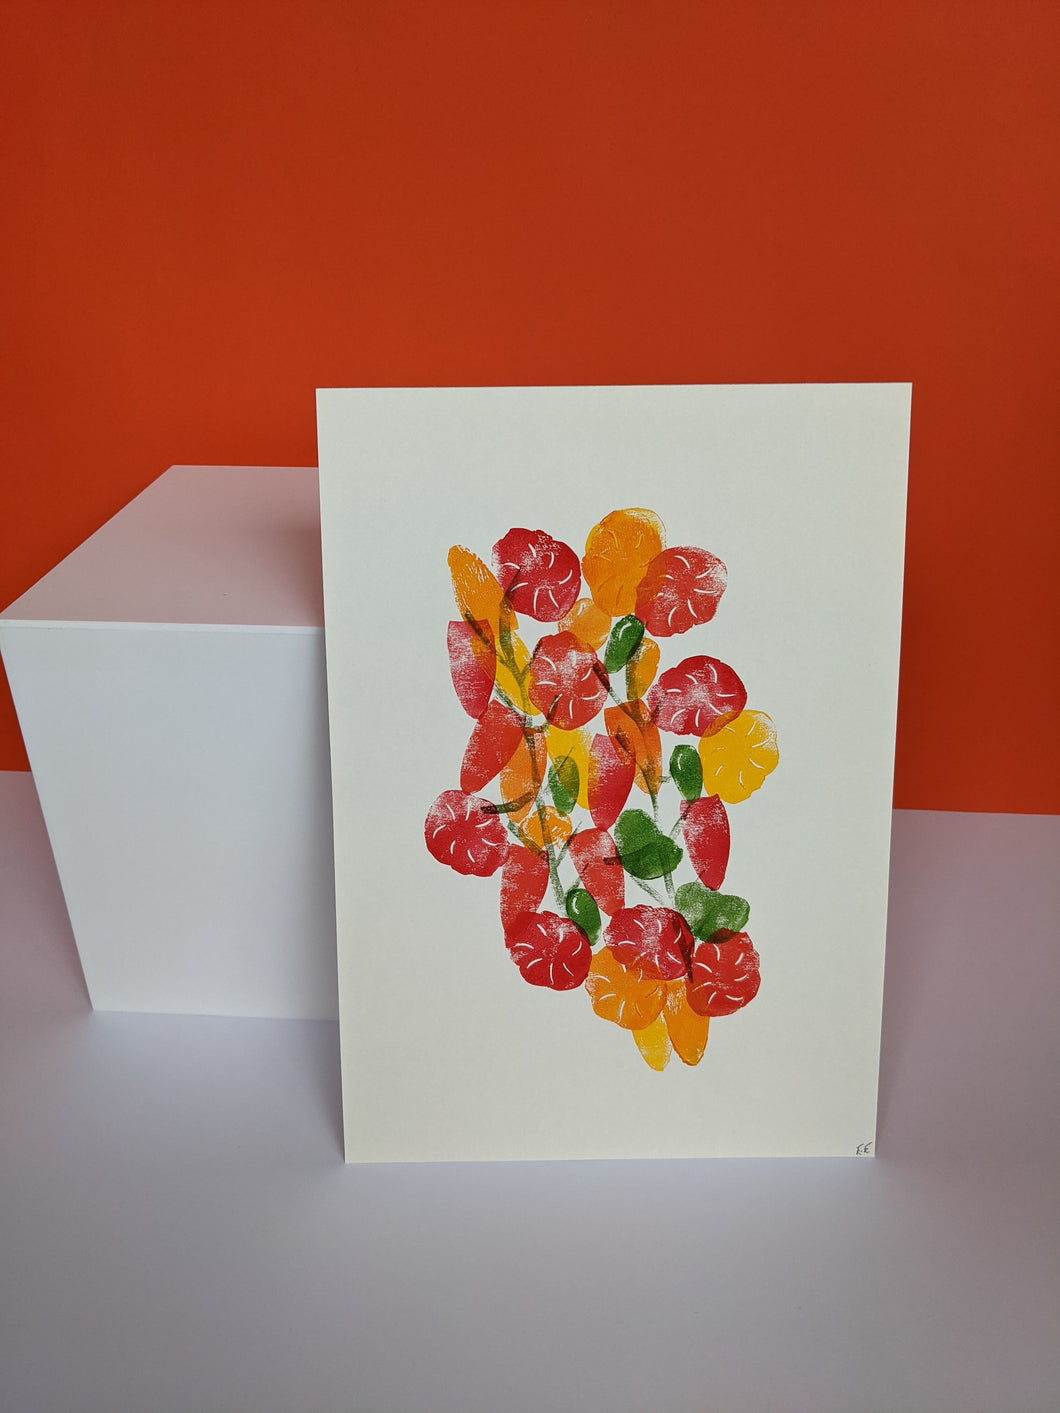 Colourful tomatoes print in yellow, green, orange and red